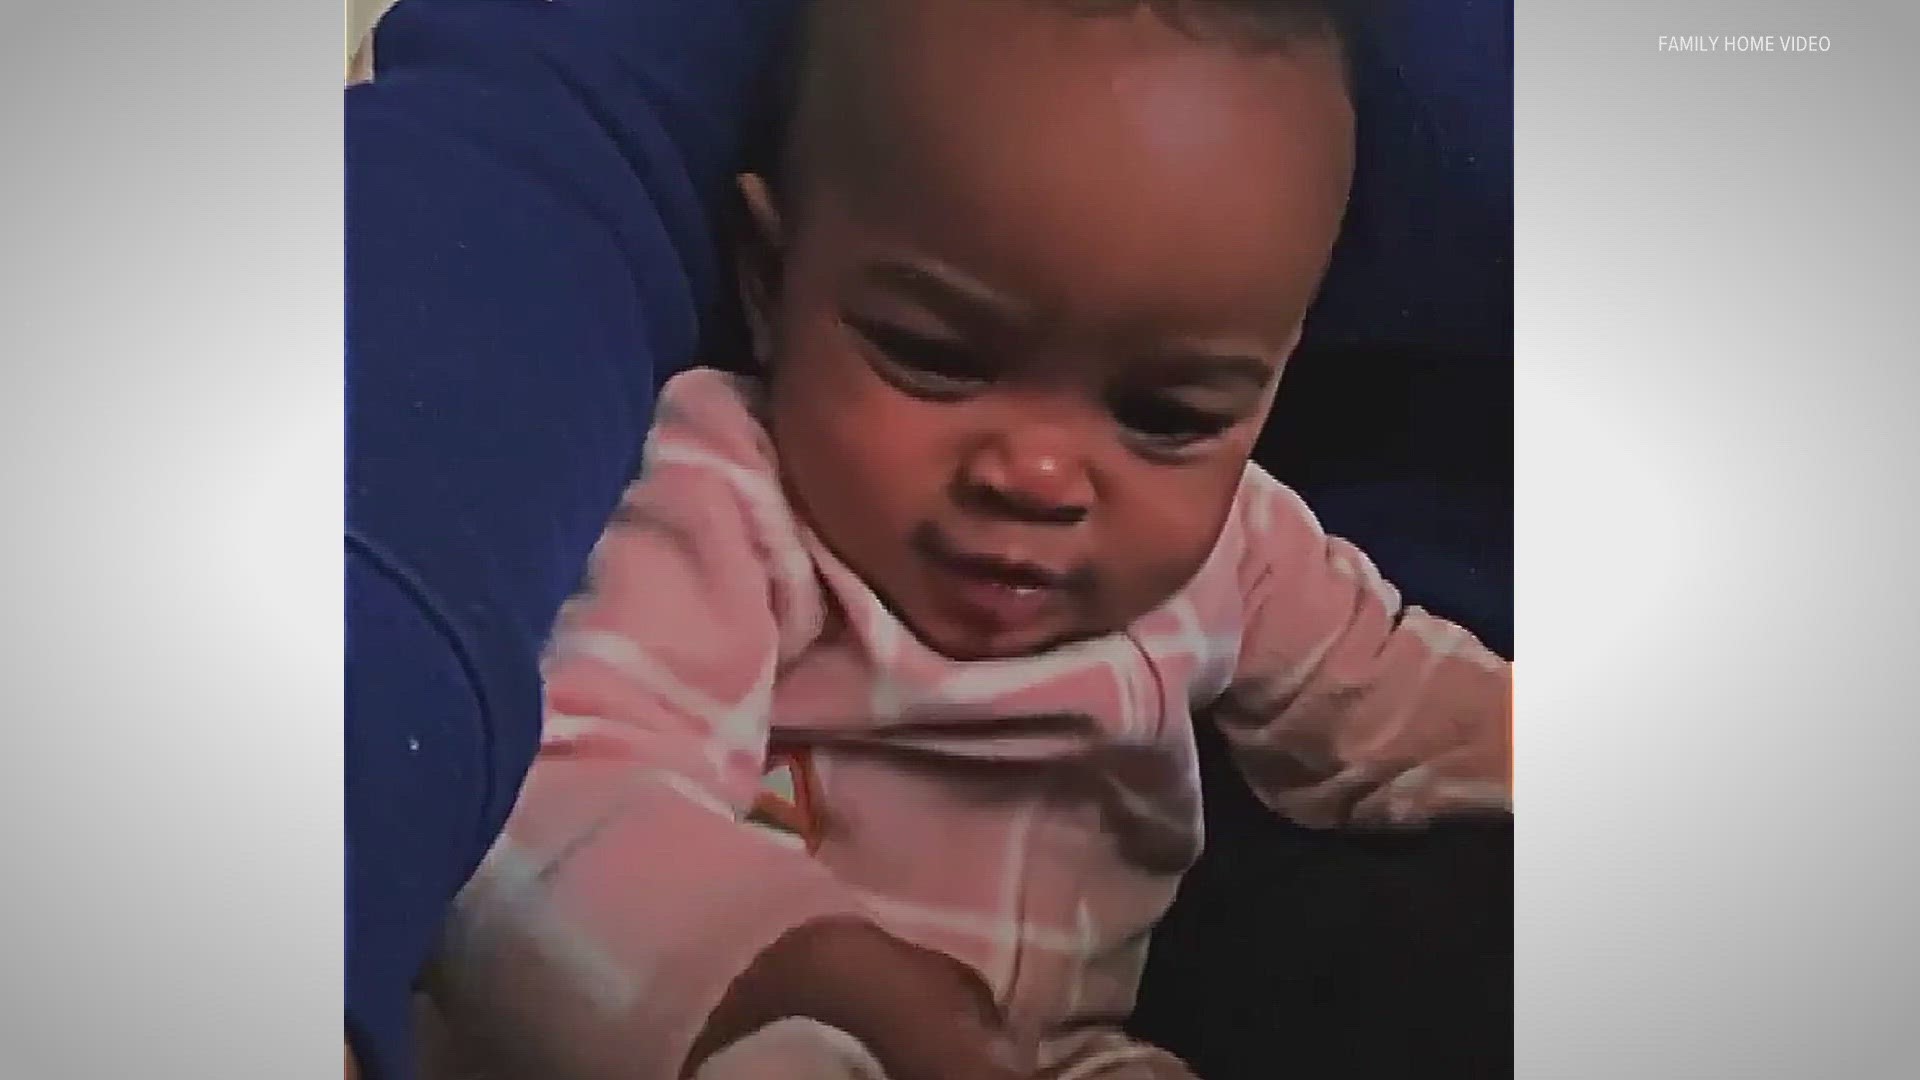 A family wants to know why no one is charged in the death of 7-month-old Harmonnie Jones, who was beaten to death in January.